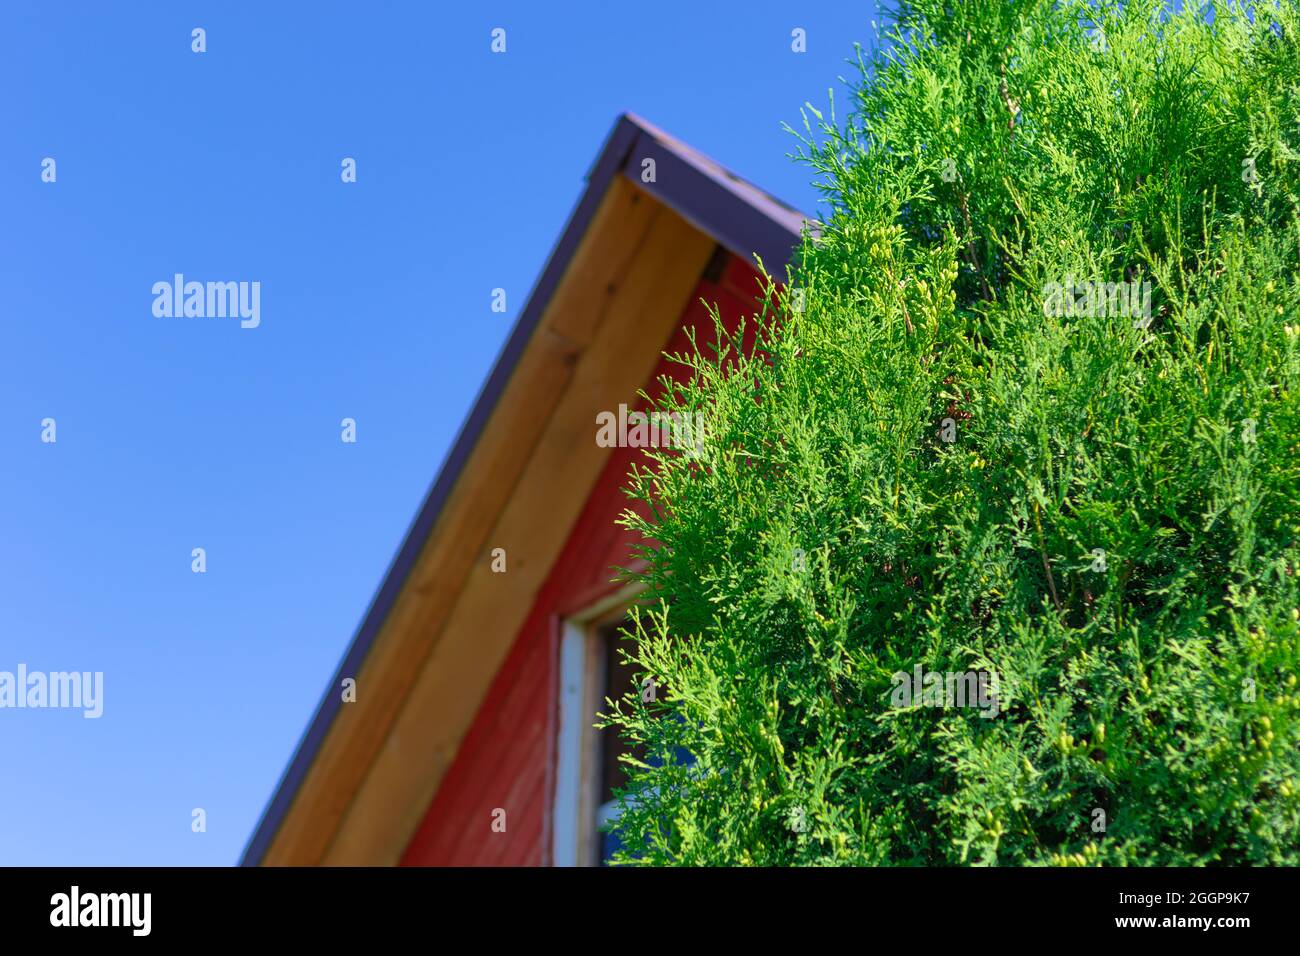 The roof of an old wooden house in a village against a background of blue sky and green foliage. Hot sunny summer day. Selective focus. Close-up Stock Photo